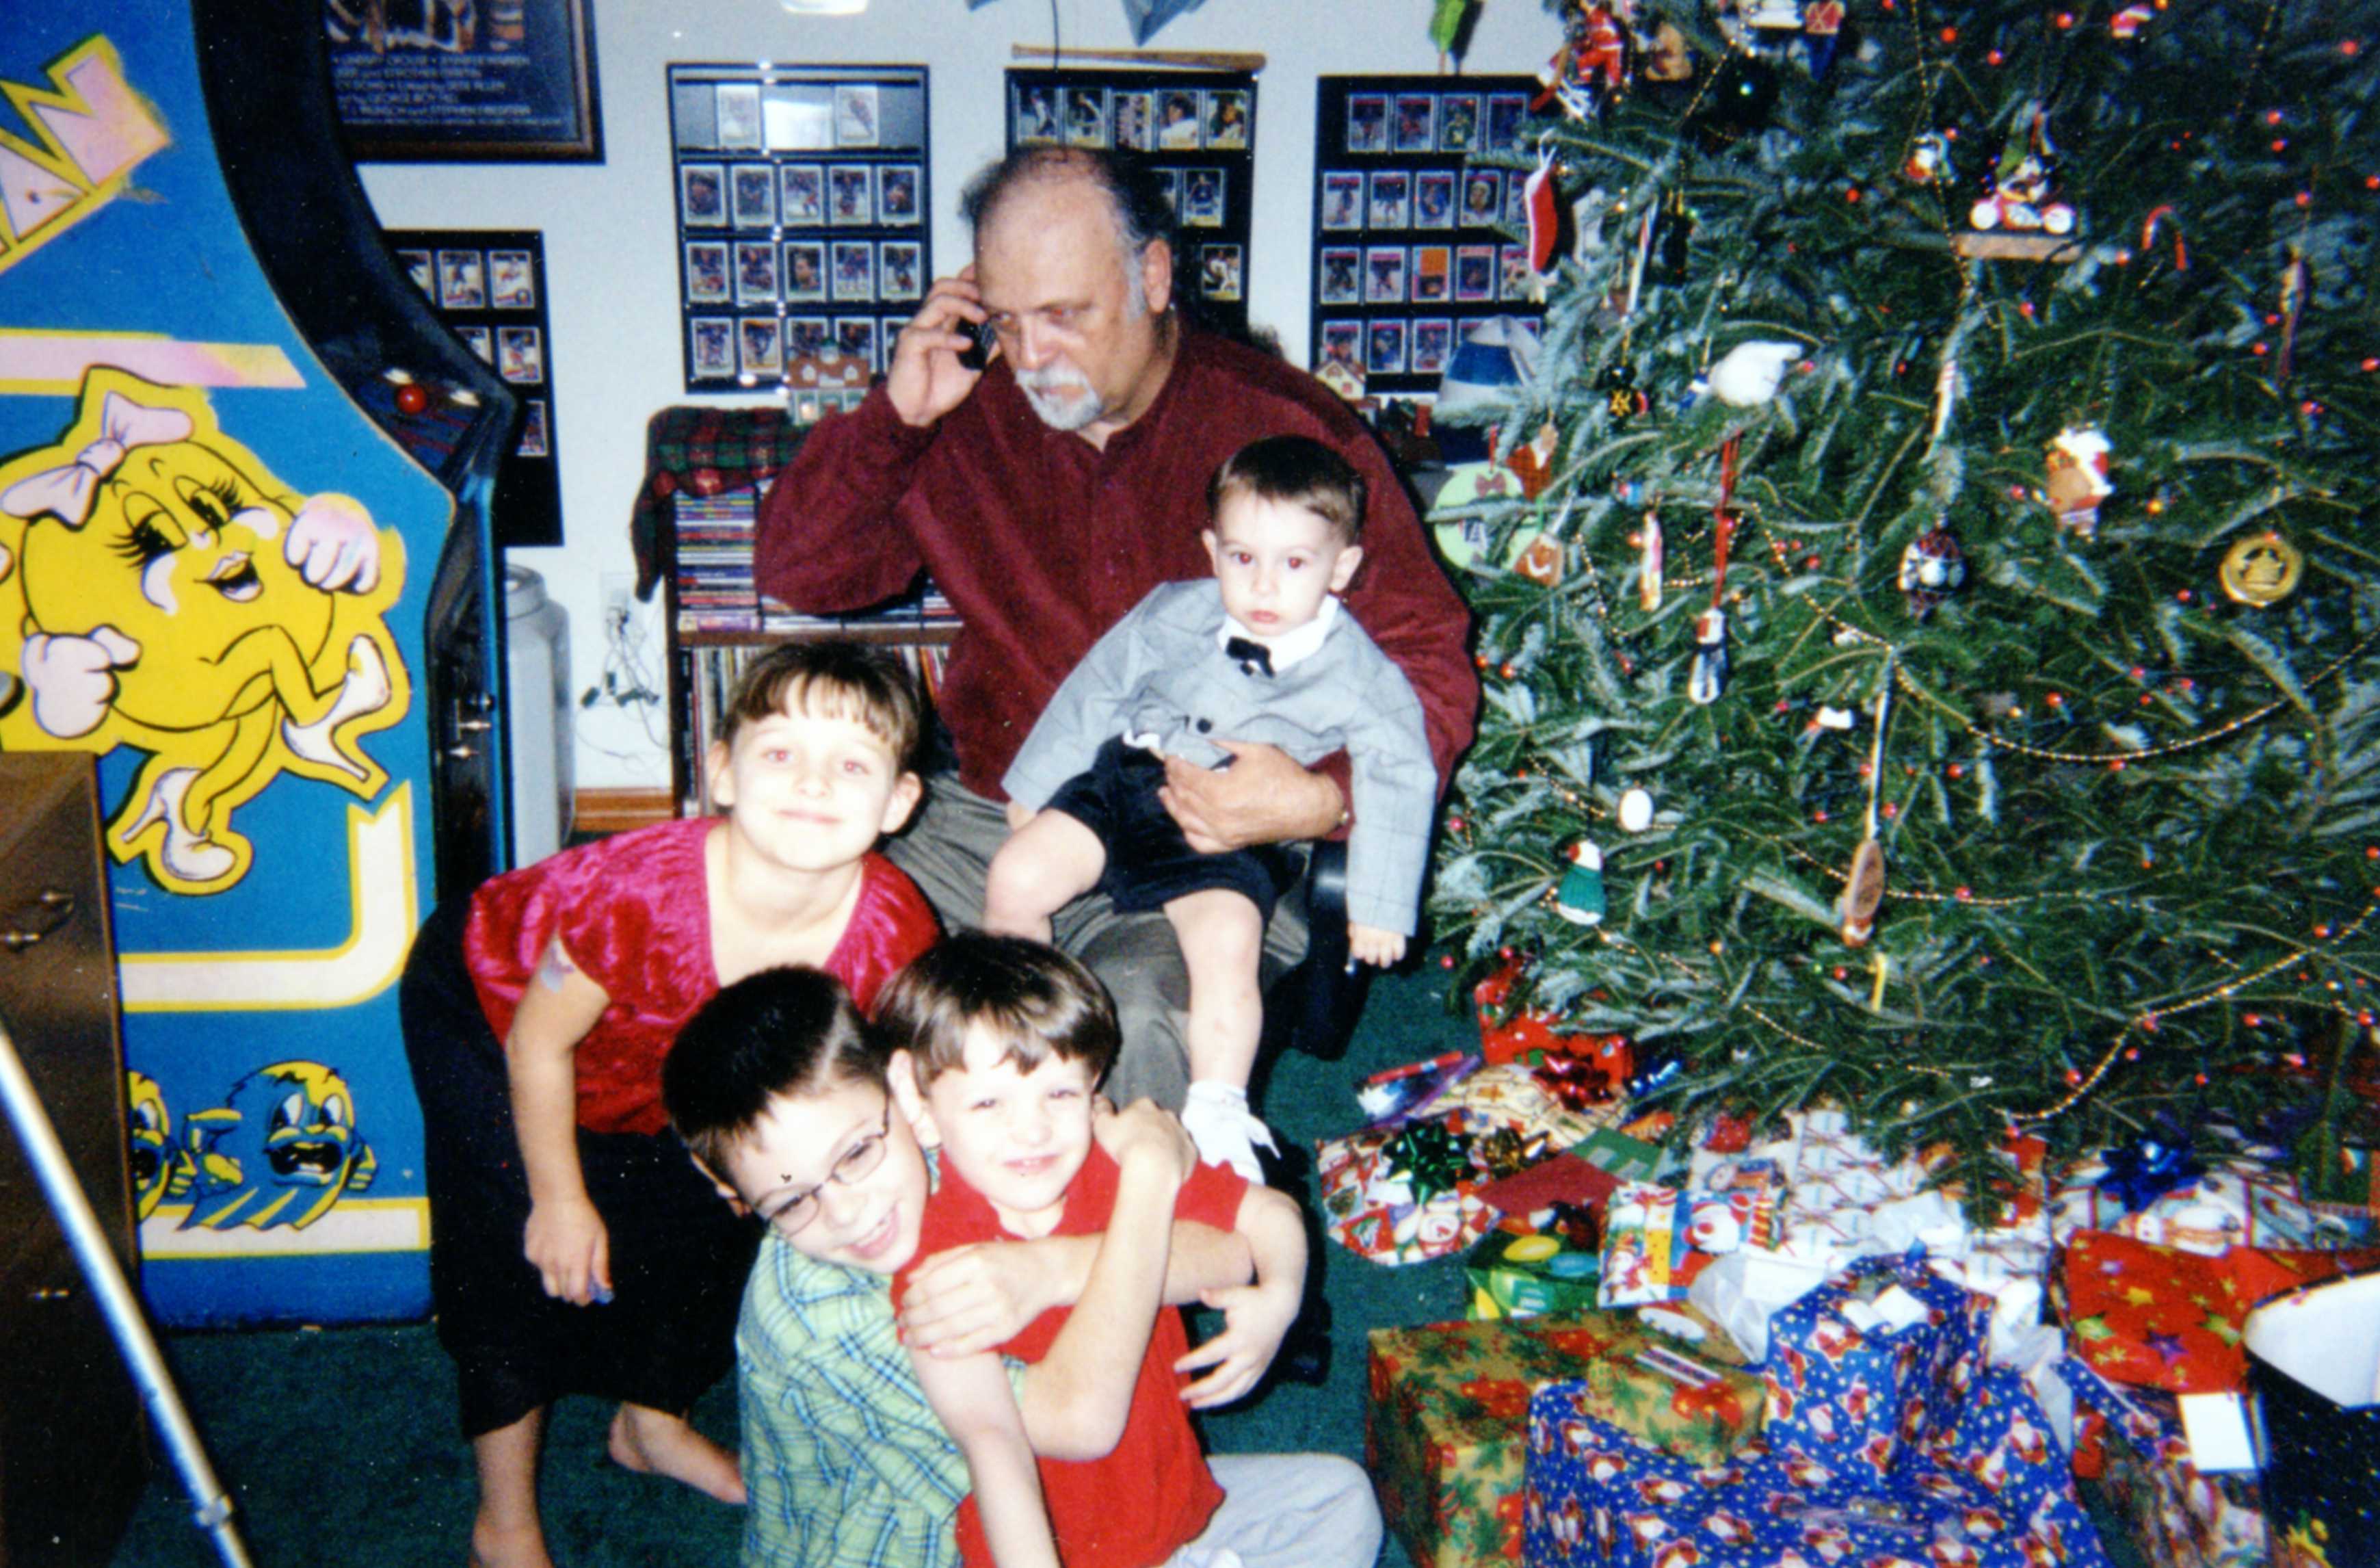 Buddy, with some of his grandchildren. I think this was taken in 2003.